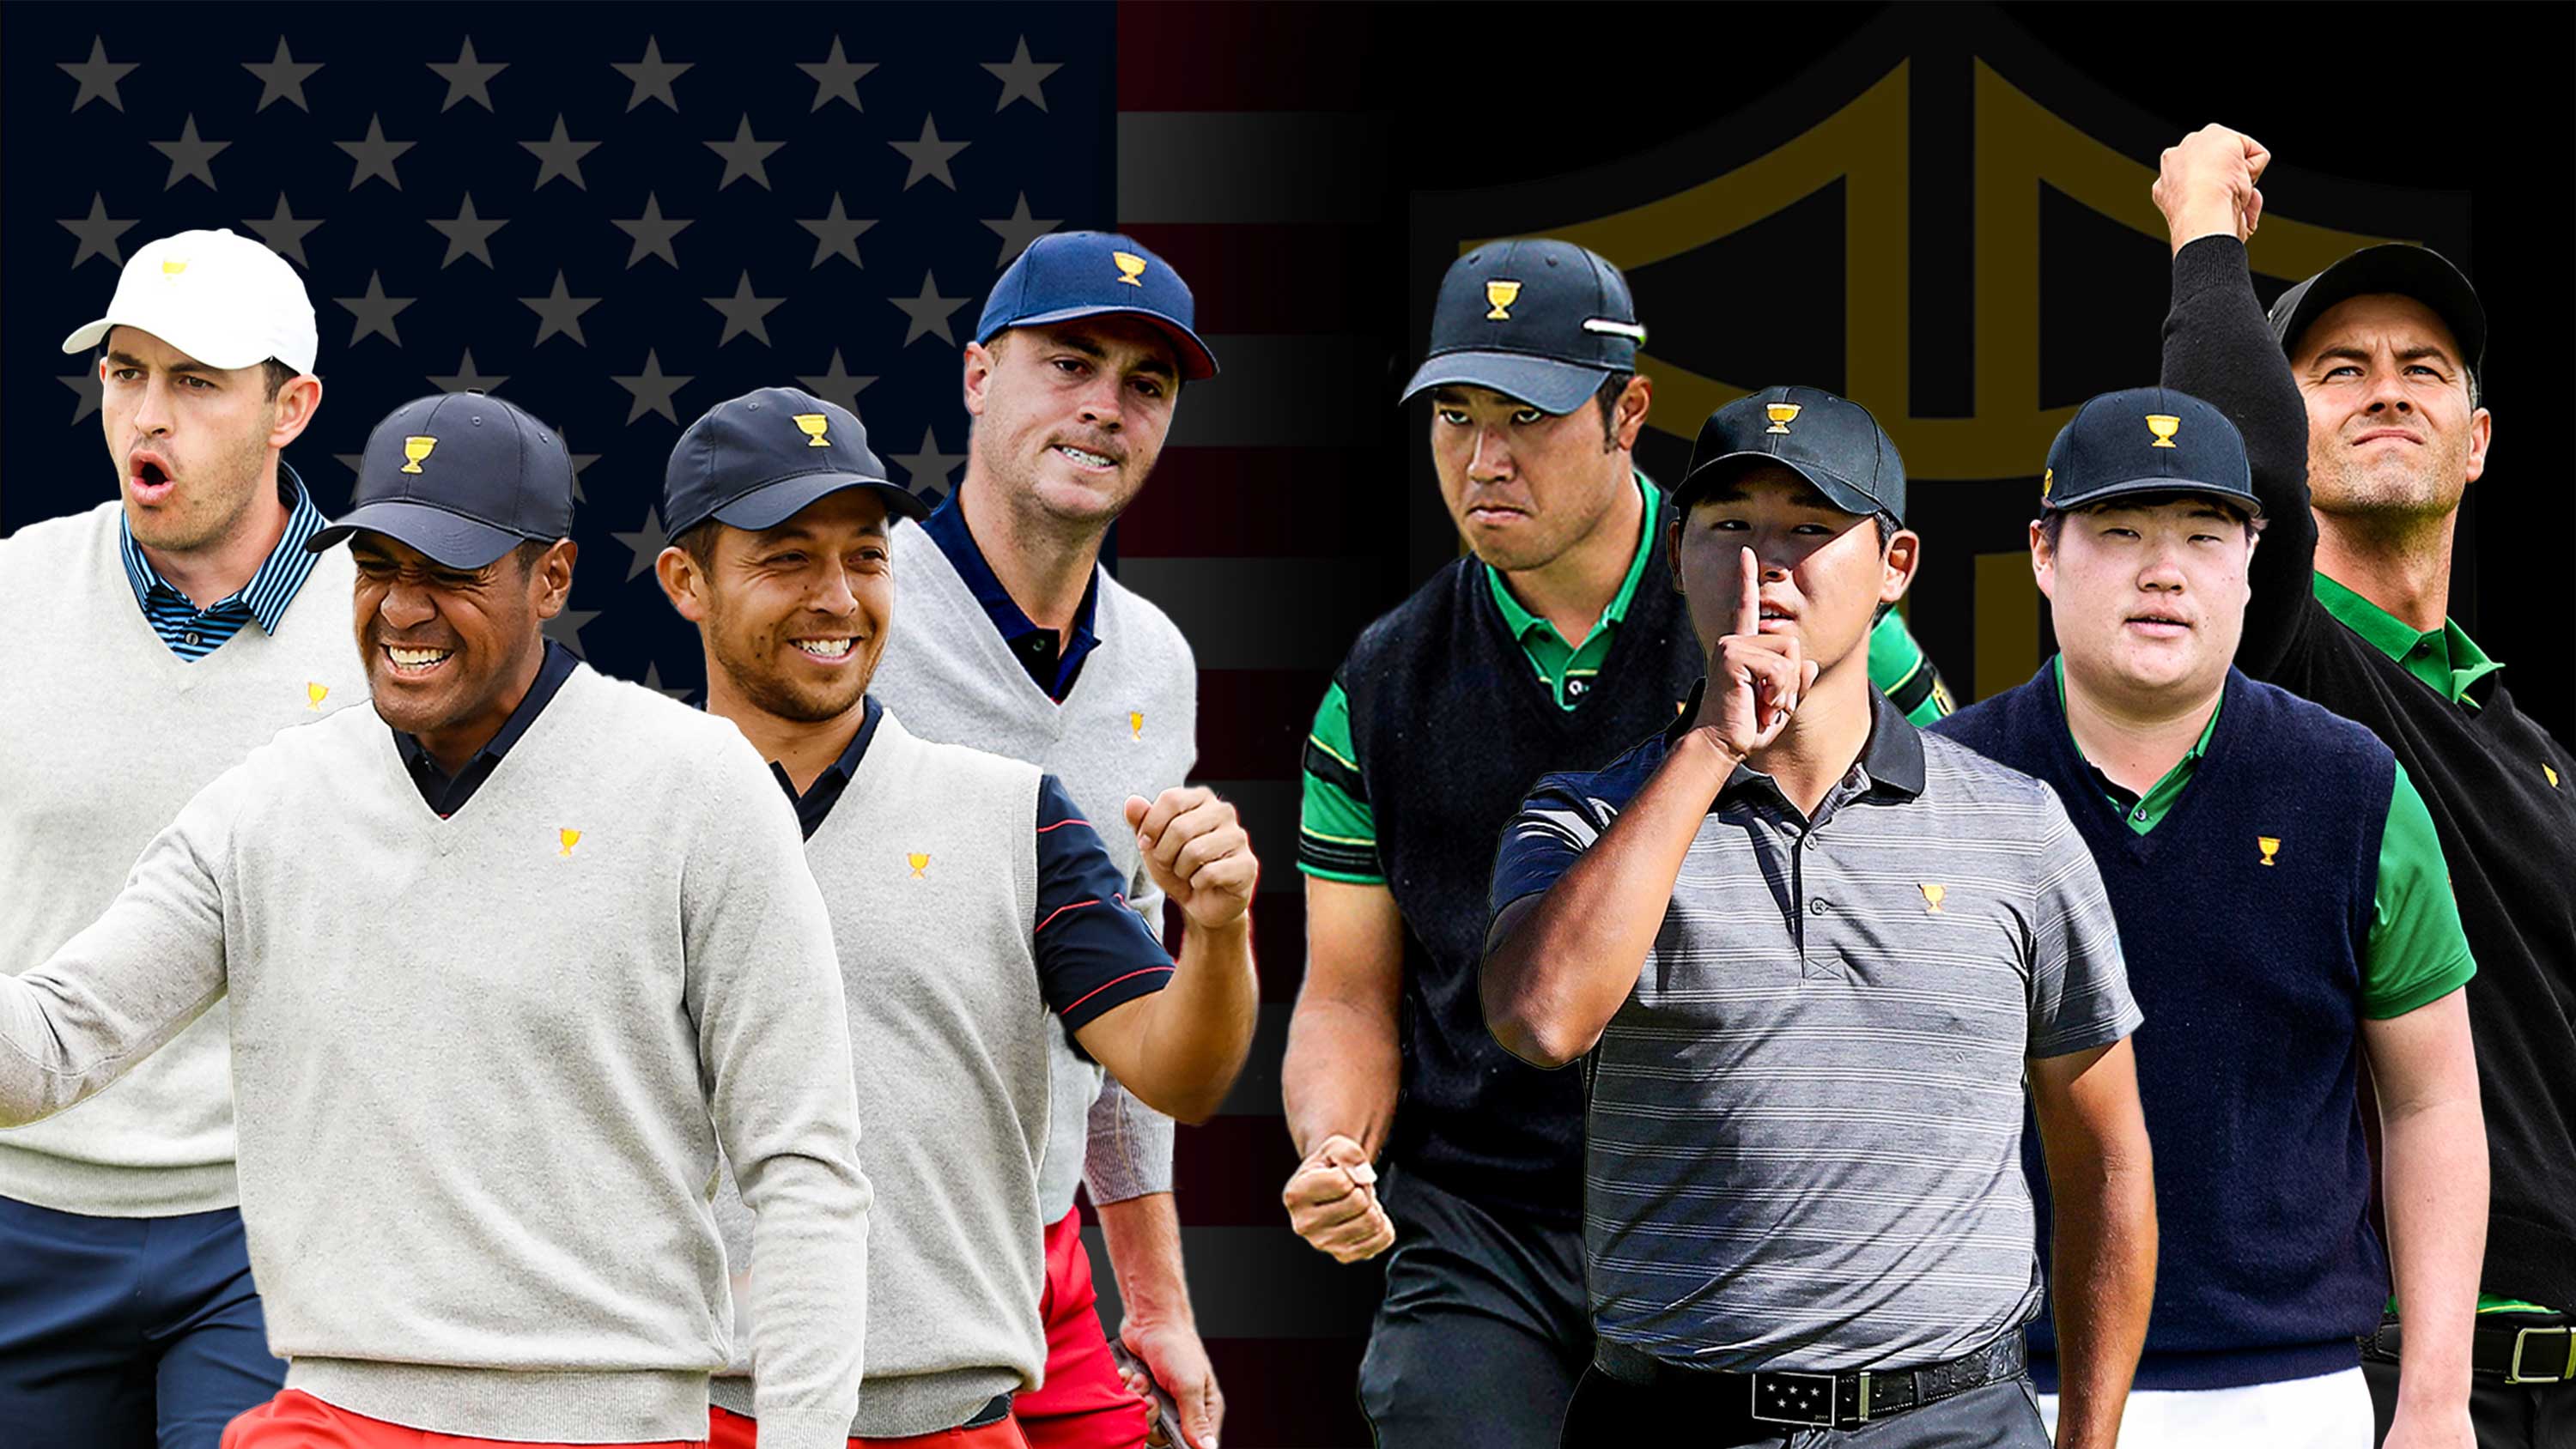 I. Introduction to the Presidents Cup: Another Level of Team Golf